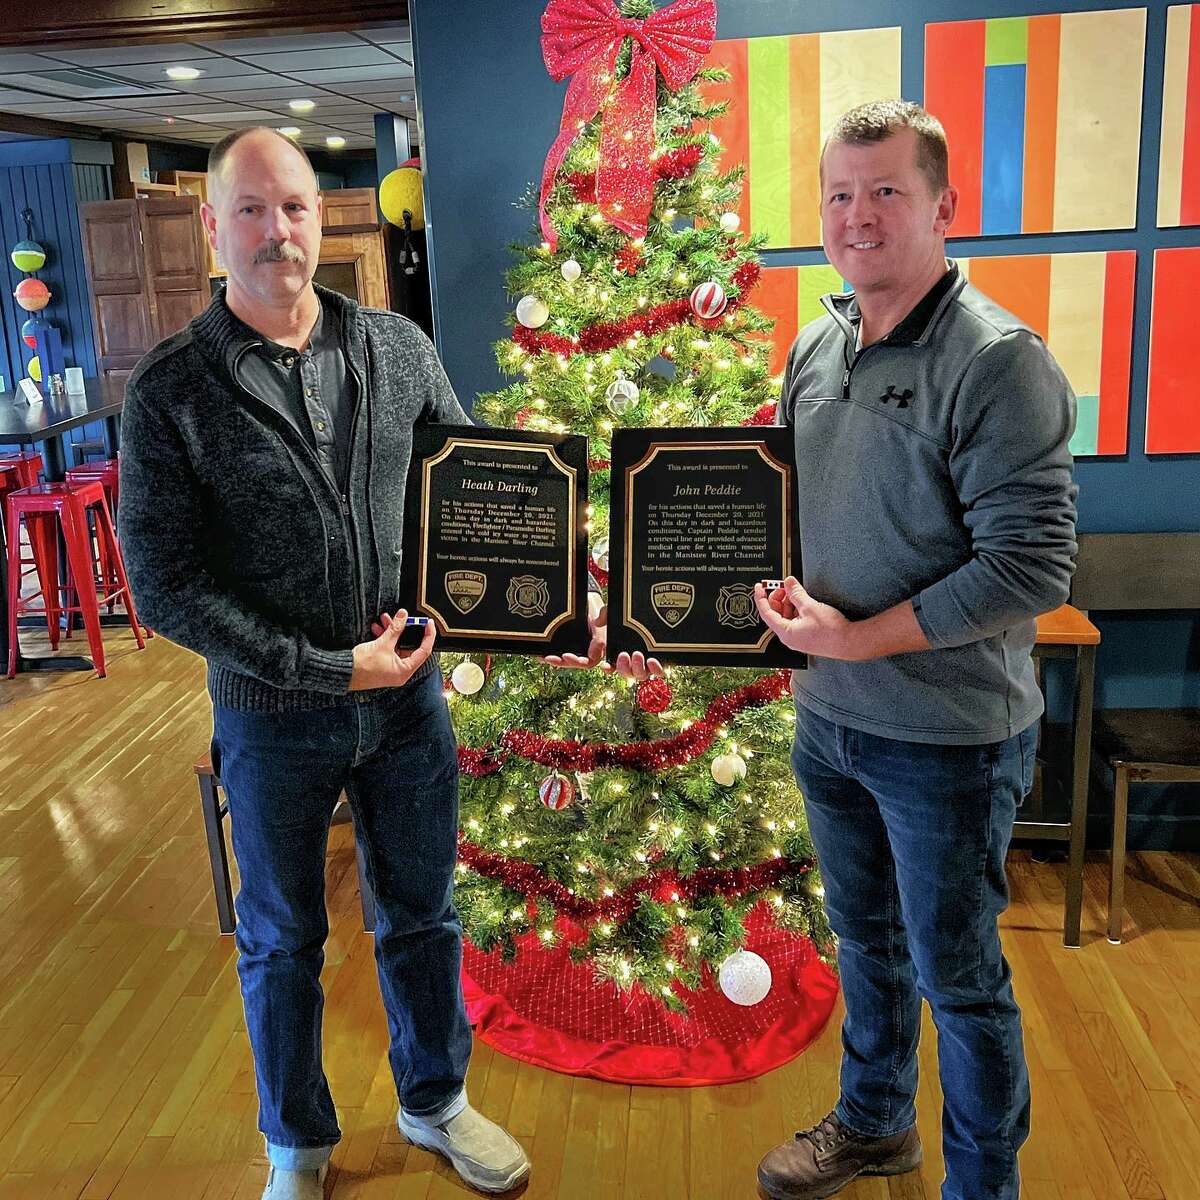 (From left) Firefighter medic Heath Darling and Captain John Peddie, of the Manistee City Fire Department, received placards recognizing their efforts in rescuing a man from the Manistee River Channel in January.  